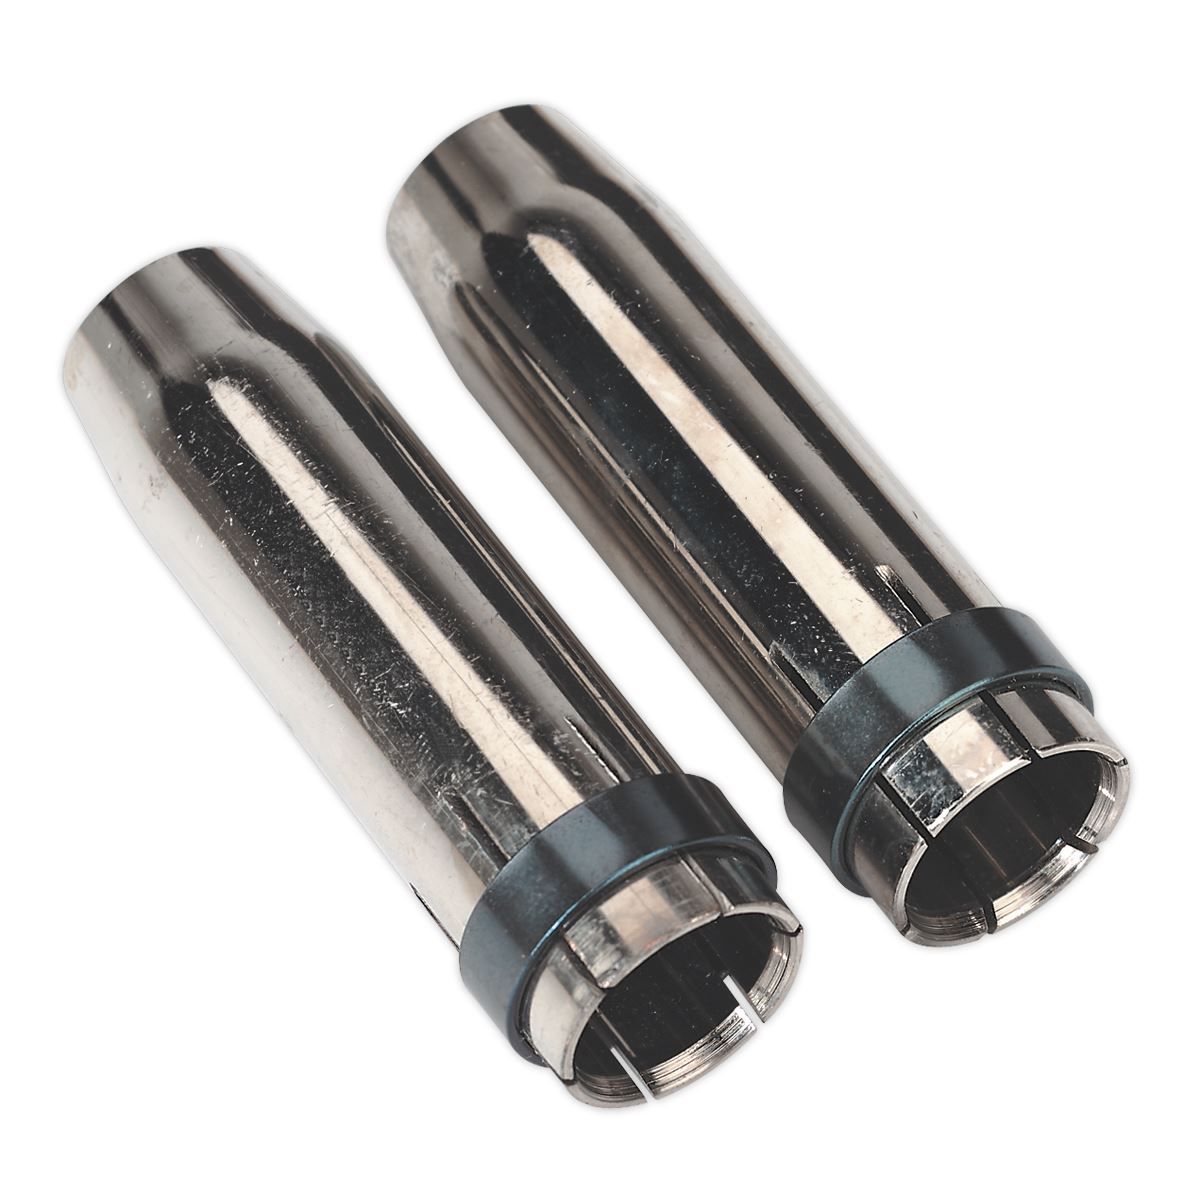 Sealey Conical Nozzle MB36 Pack of 2